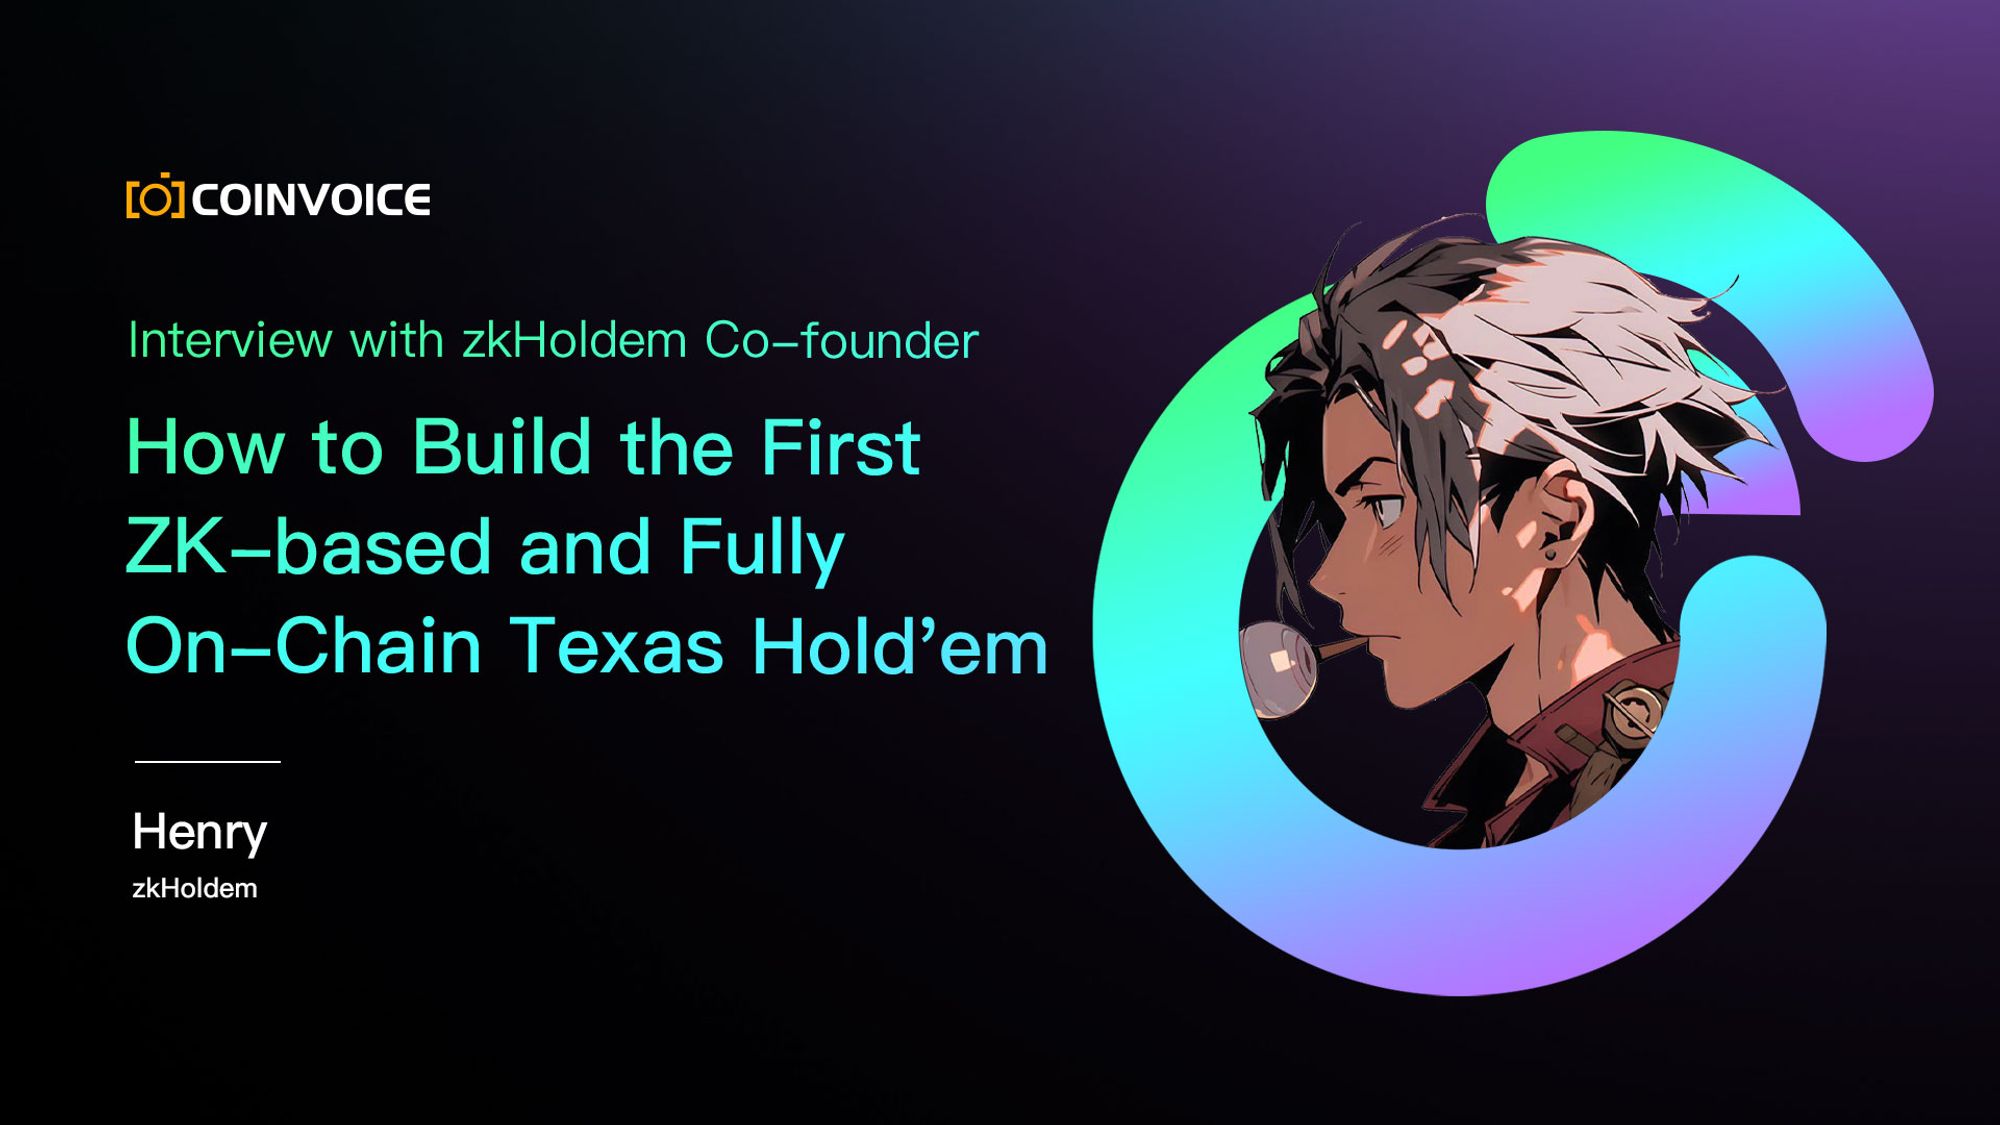 Interview with zkHoldem Co-founder Henry: How to Build the First ZK-based and Fully On-Chain Texas Hold'em